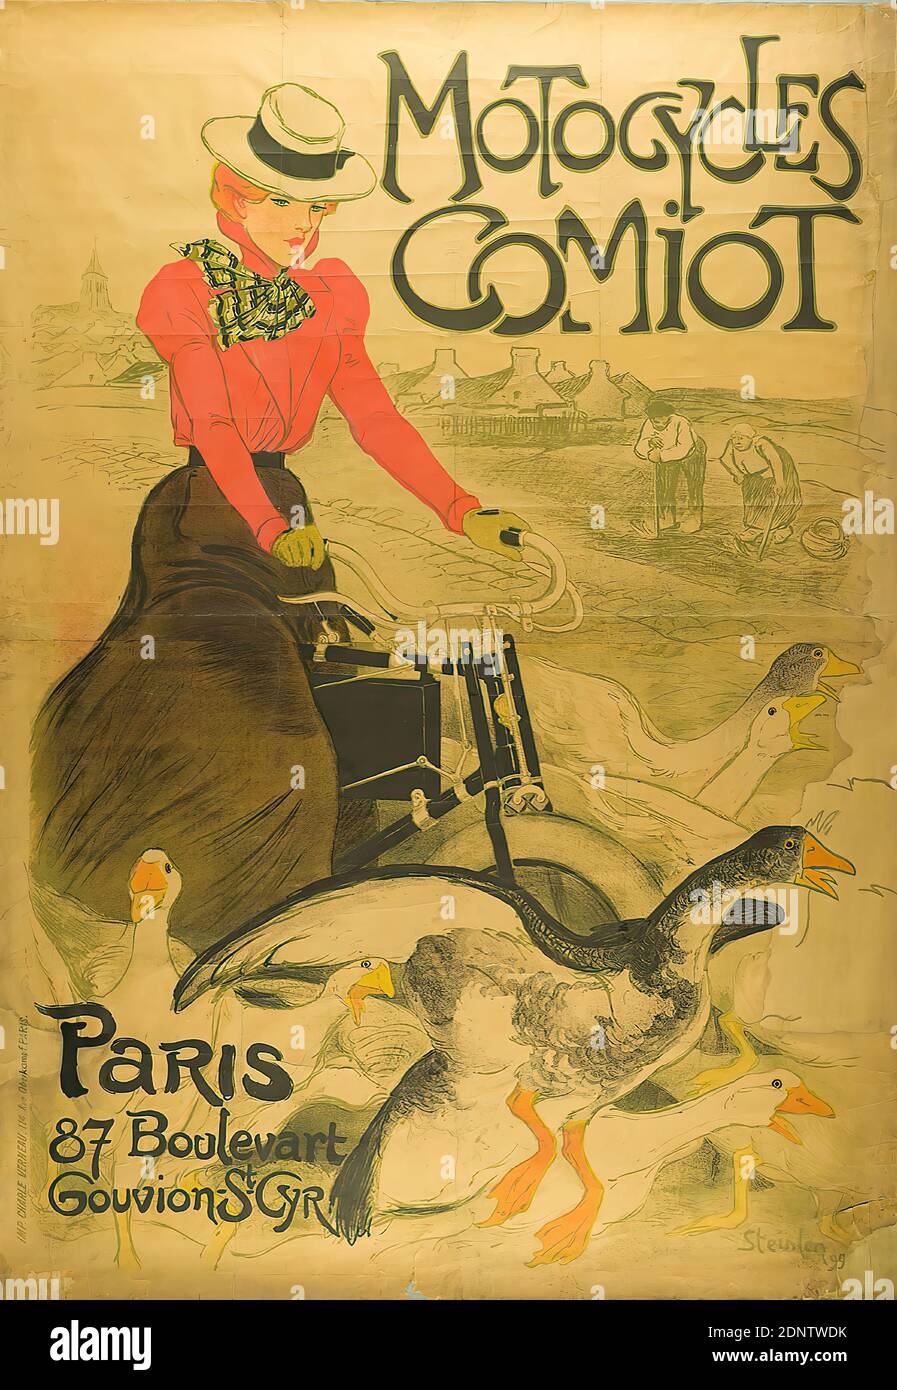 Théophile-Alexandre Steinlen, Imprimerie Charles Verneau, Motocycles Comiot, paper, lithography, Total: height: 198 cm; width: 138 cm, signed and dated: in print lower right: Steinlen 99, product and business advertising (posters), product advertising (posters), bicycle, two-wheeler, geese, rural life, woman Stock Photo